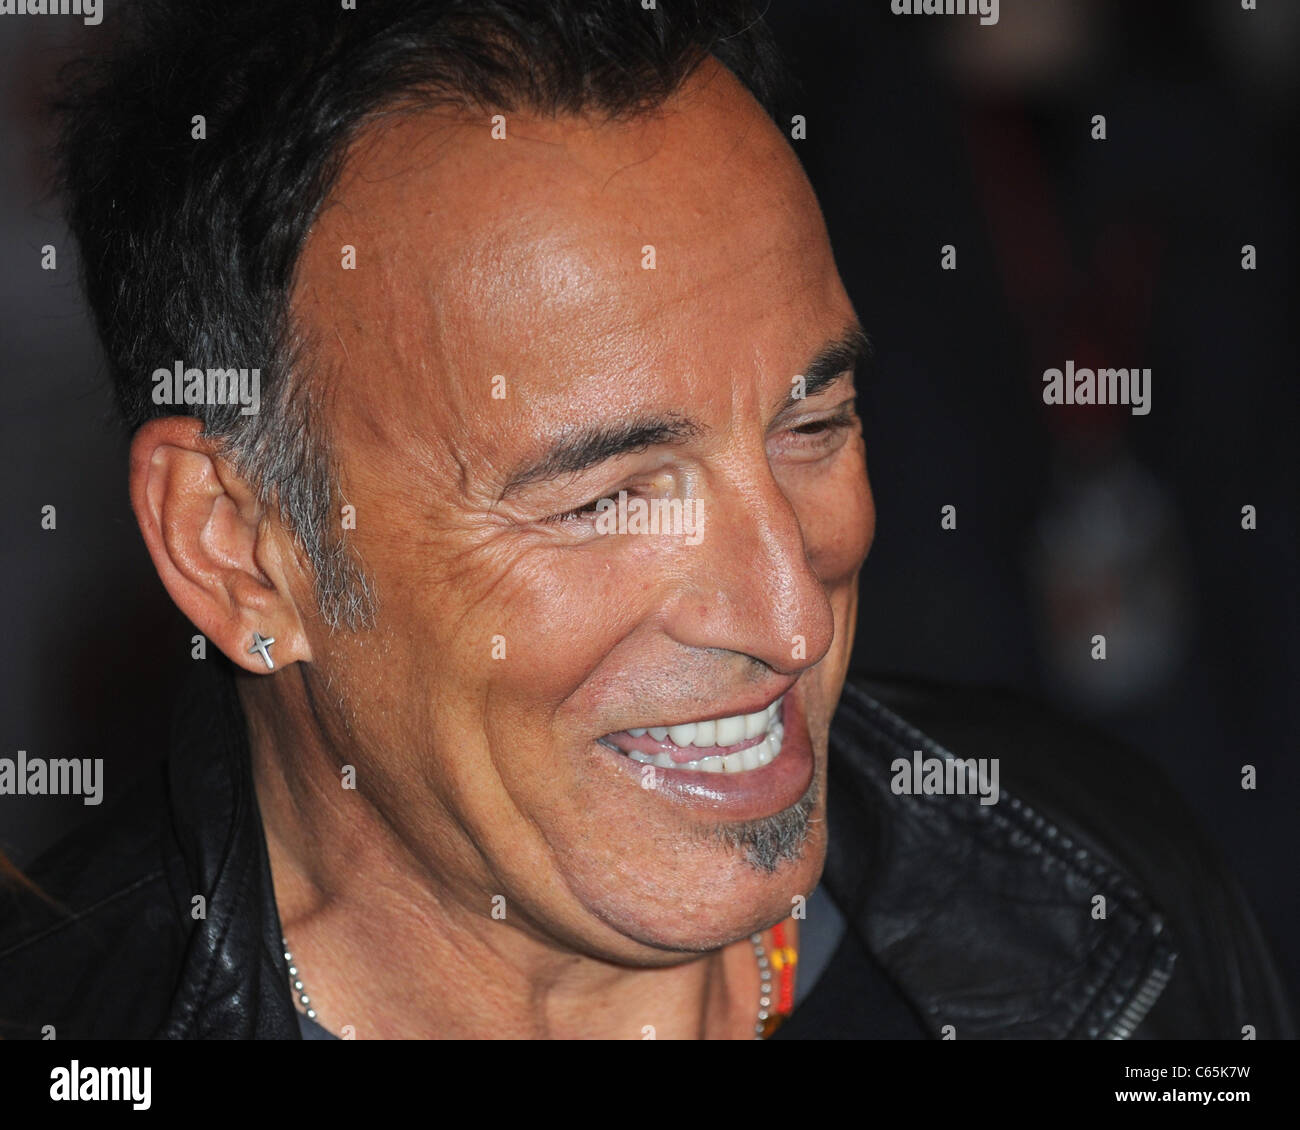 Bruce Springsteen at arrivals for THE PROMISE: THE MAKING OF DARKNESS ON  THE EDGE OF TOWN Premiere at Toronto International Film Festival (TIFF),  Roy Thomson Hall, Toronto, ON September 14, 2010. Photo